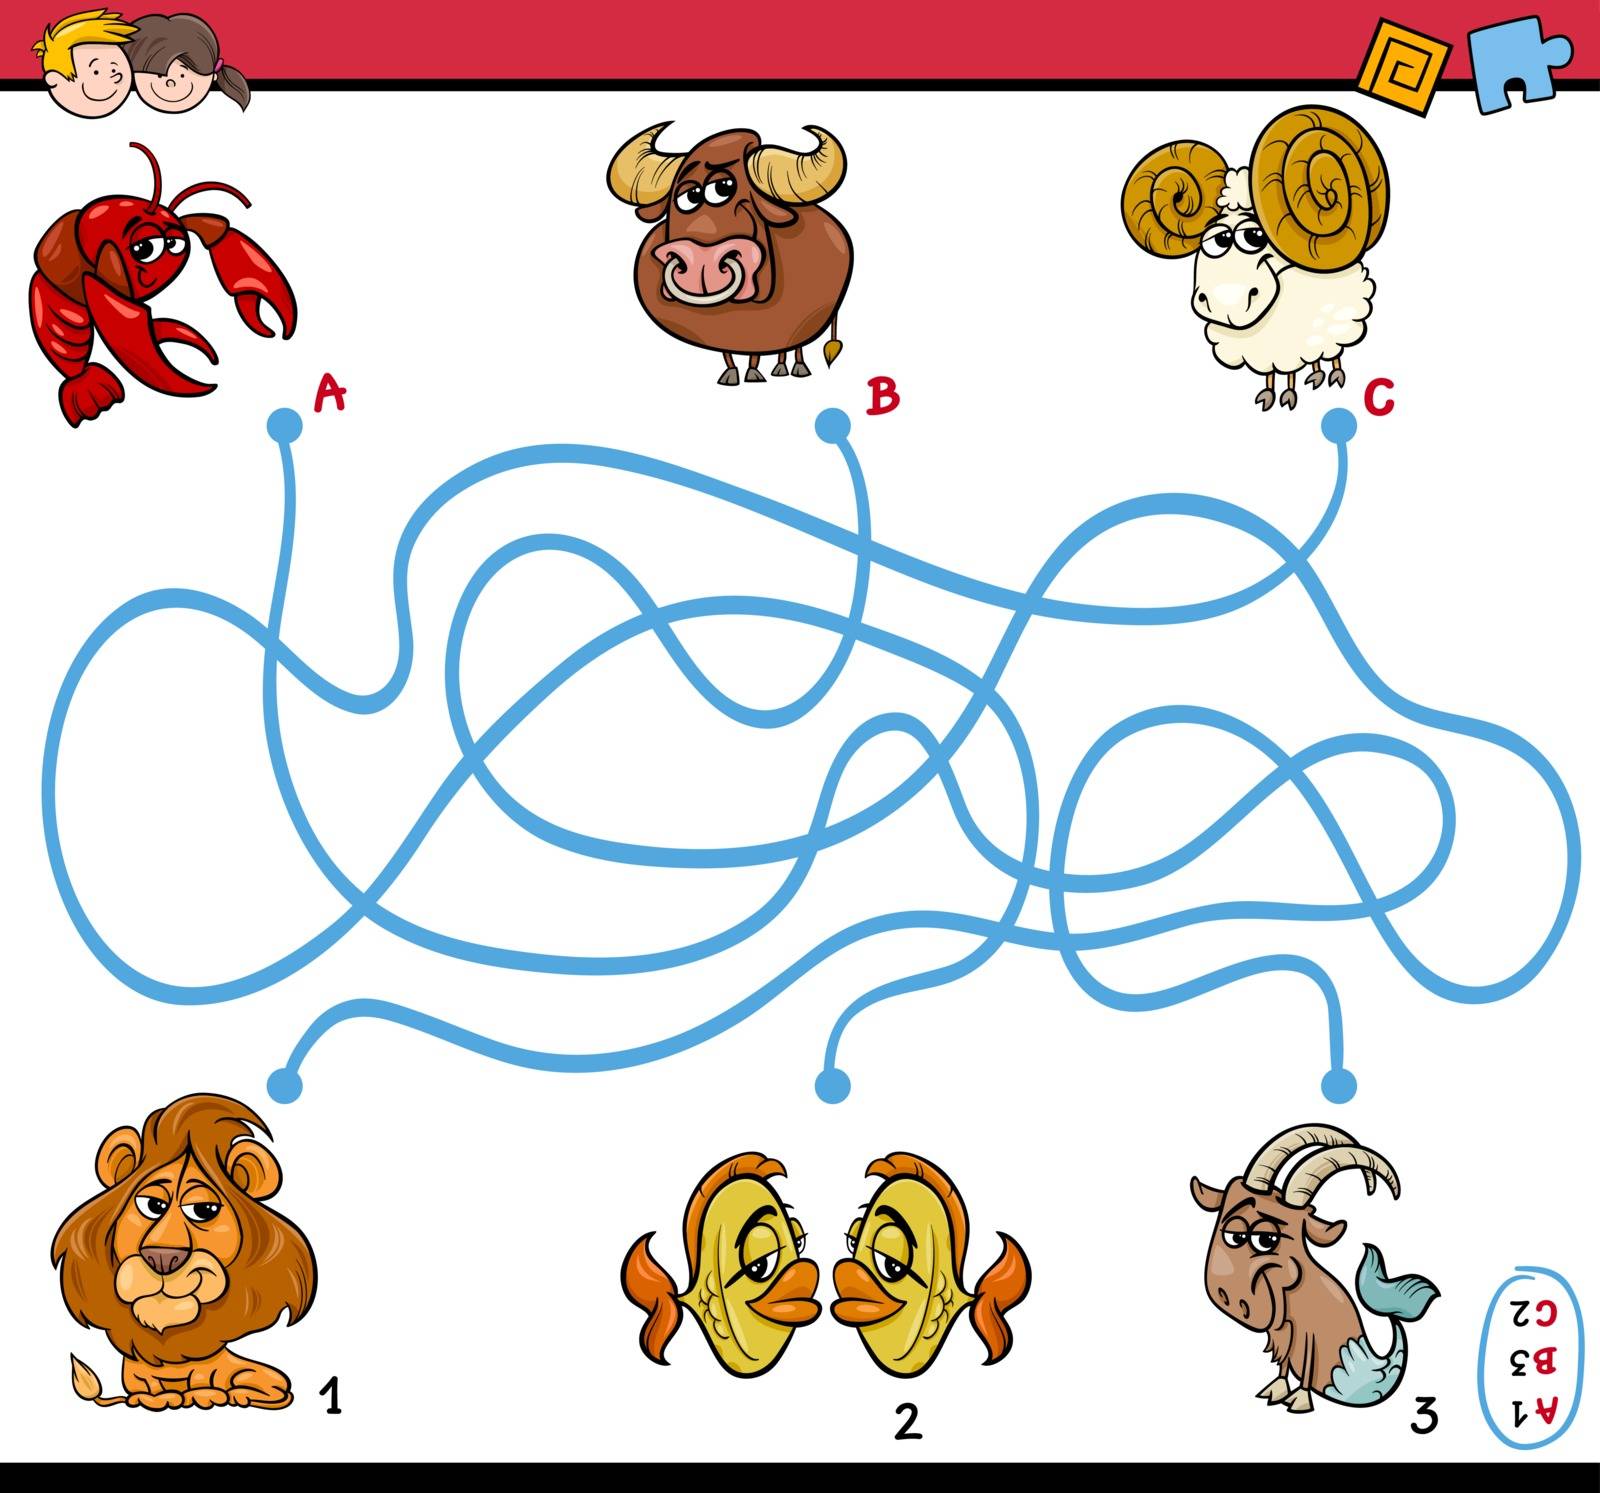 Cartoon Illustration of Educational Paths or Maze Puzzle Activity Task for Preschool Children